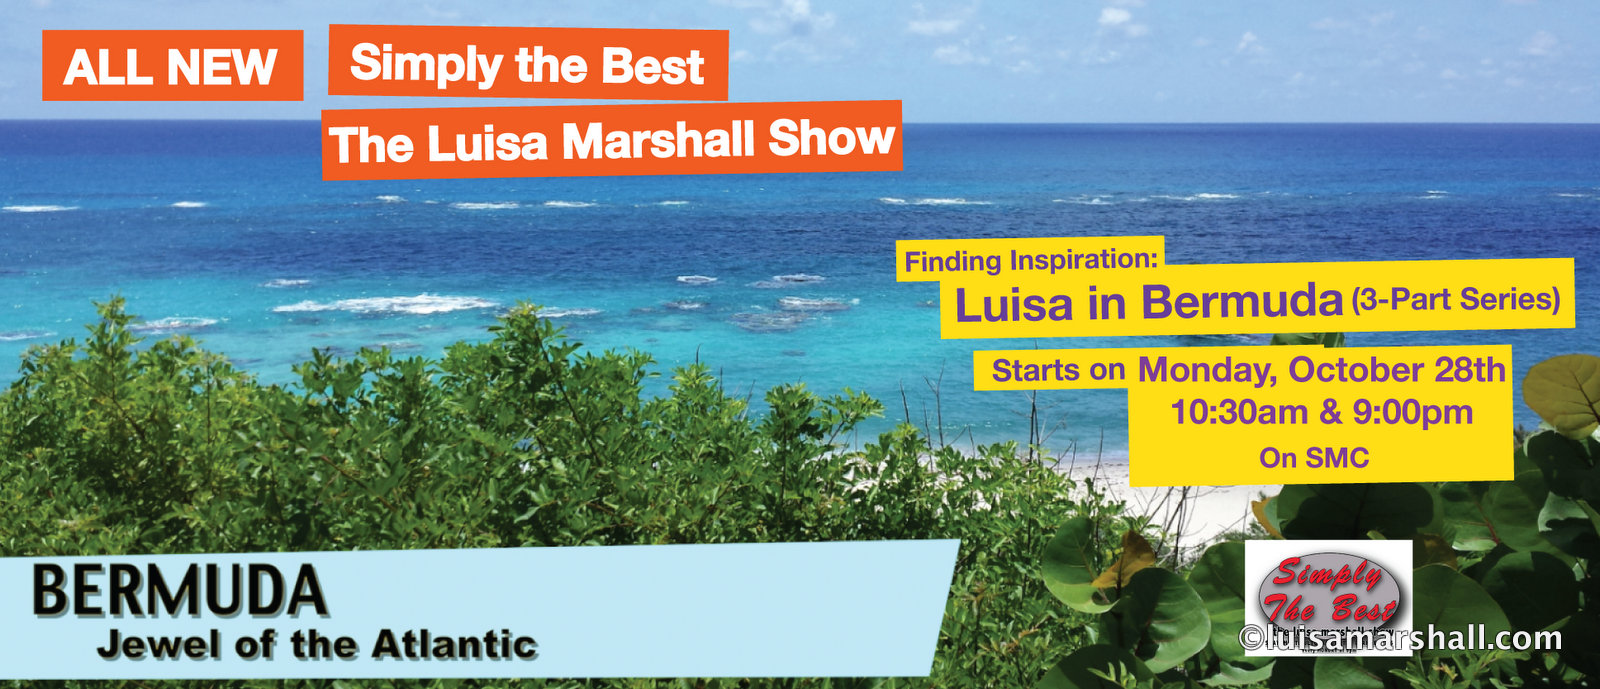 Featured- Finding Inspiration- Luisa in Bermuda - Simply the Best.